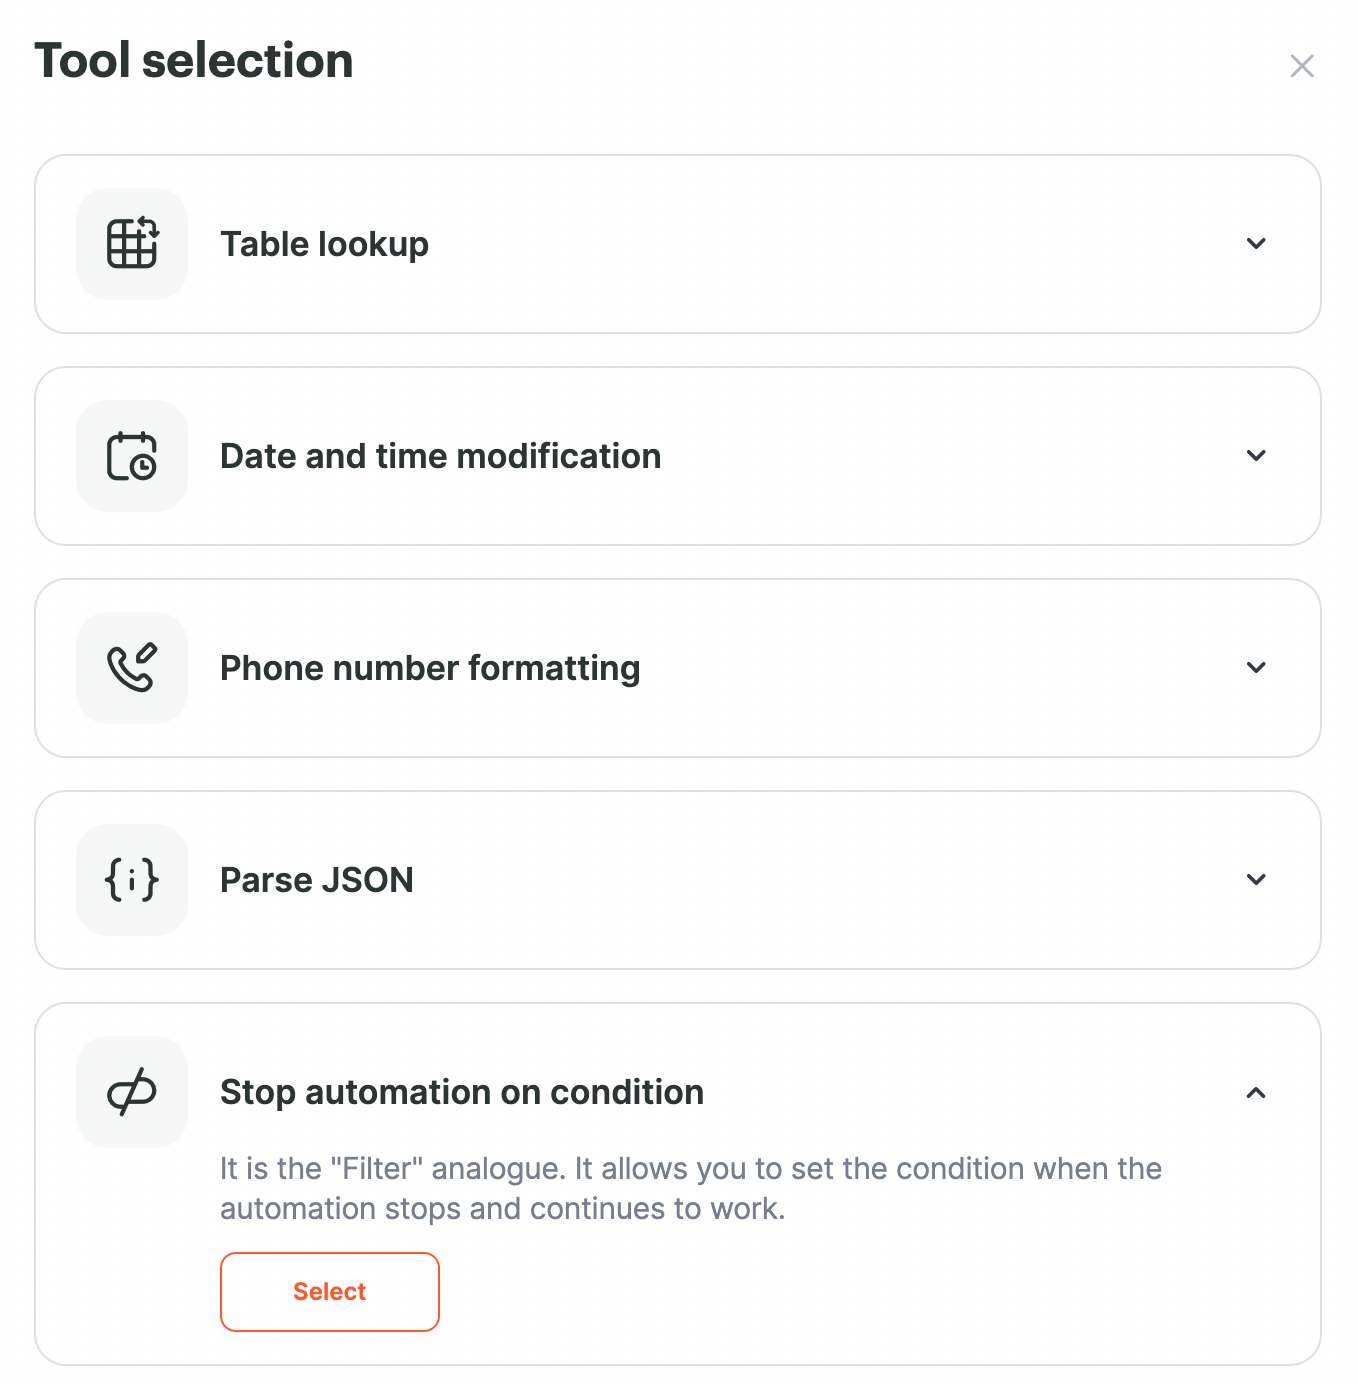  The stop automation on condition option in the automation tools section.